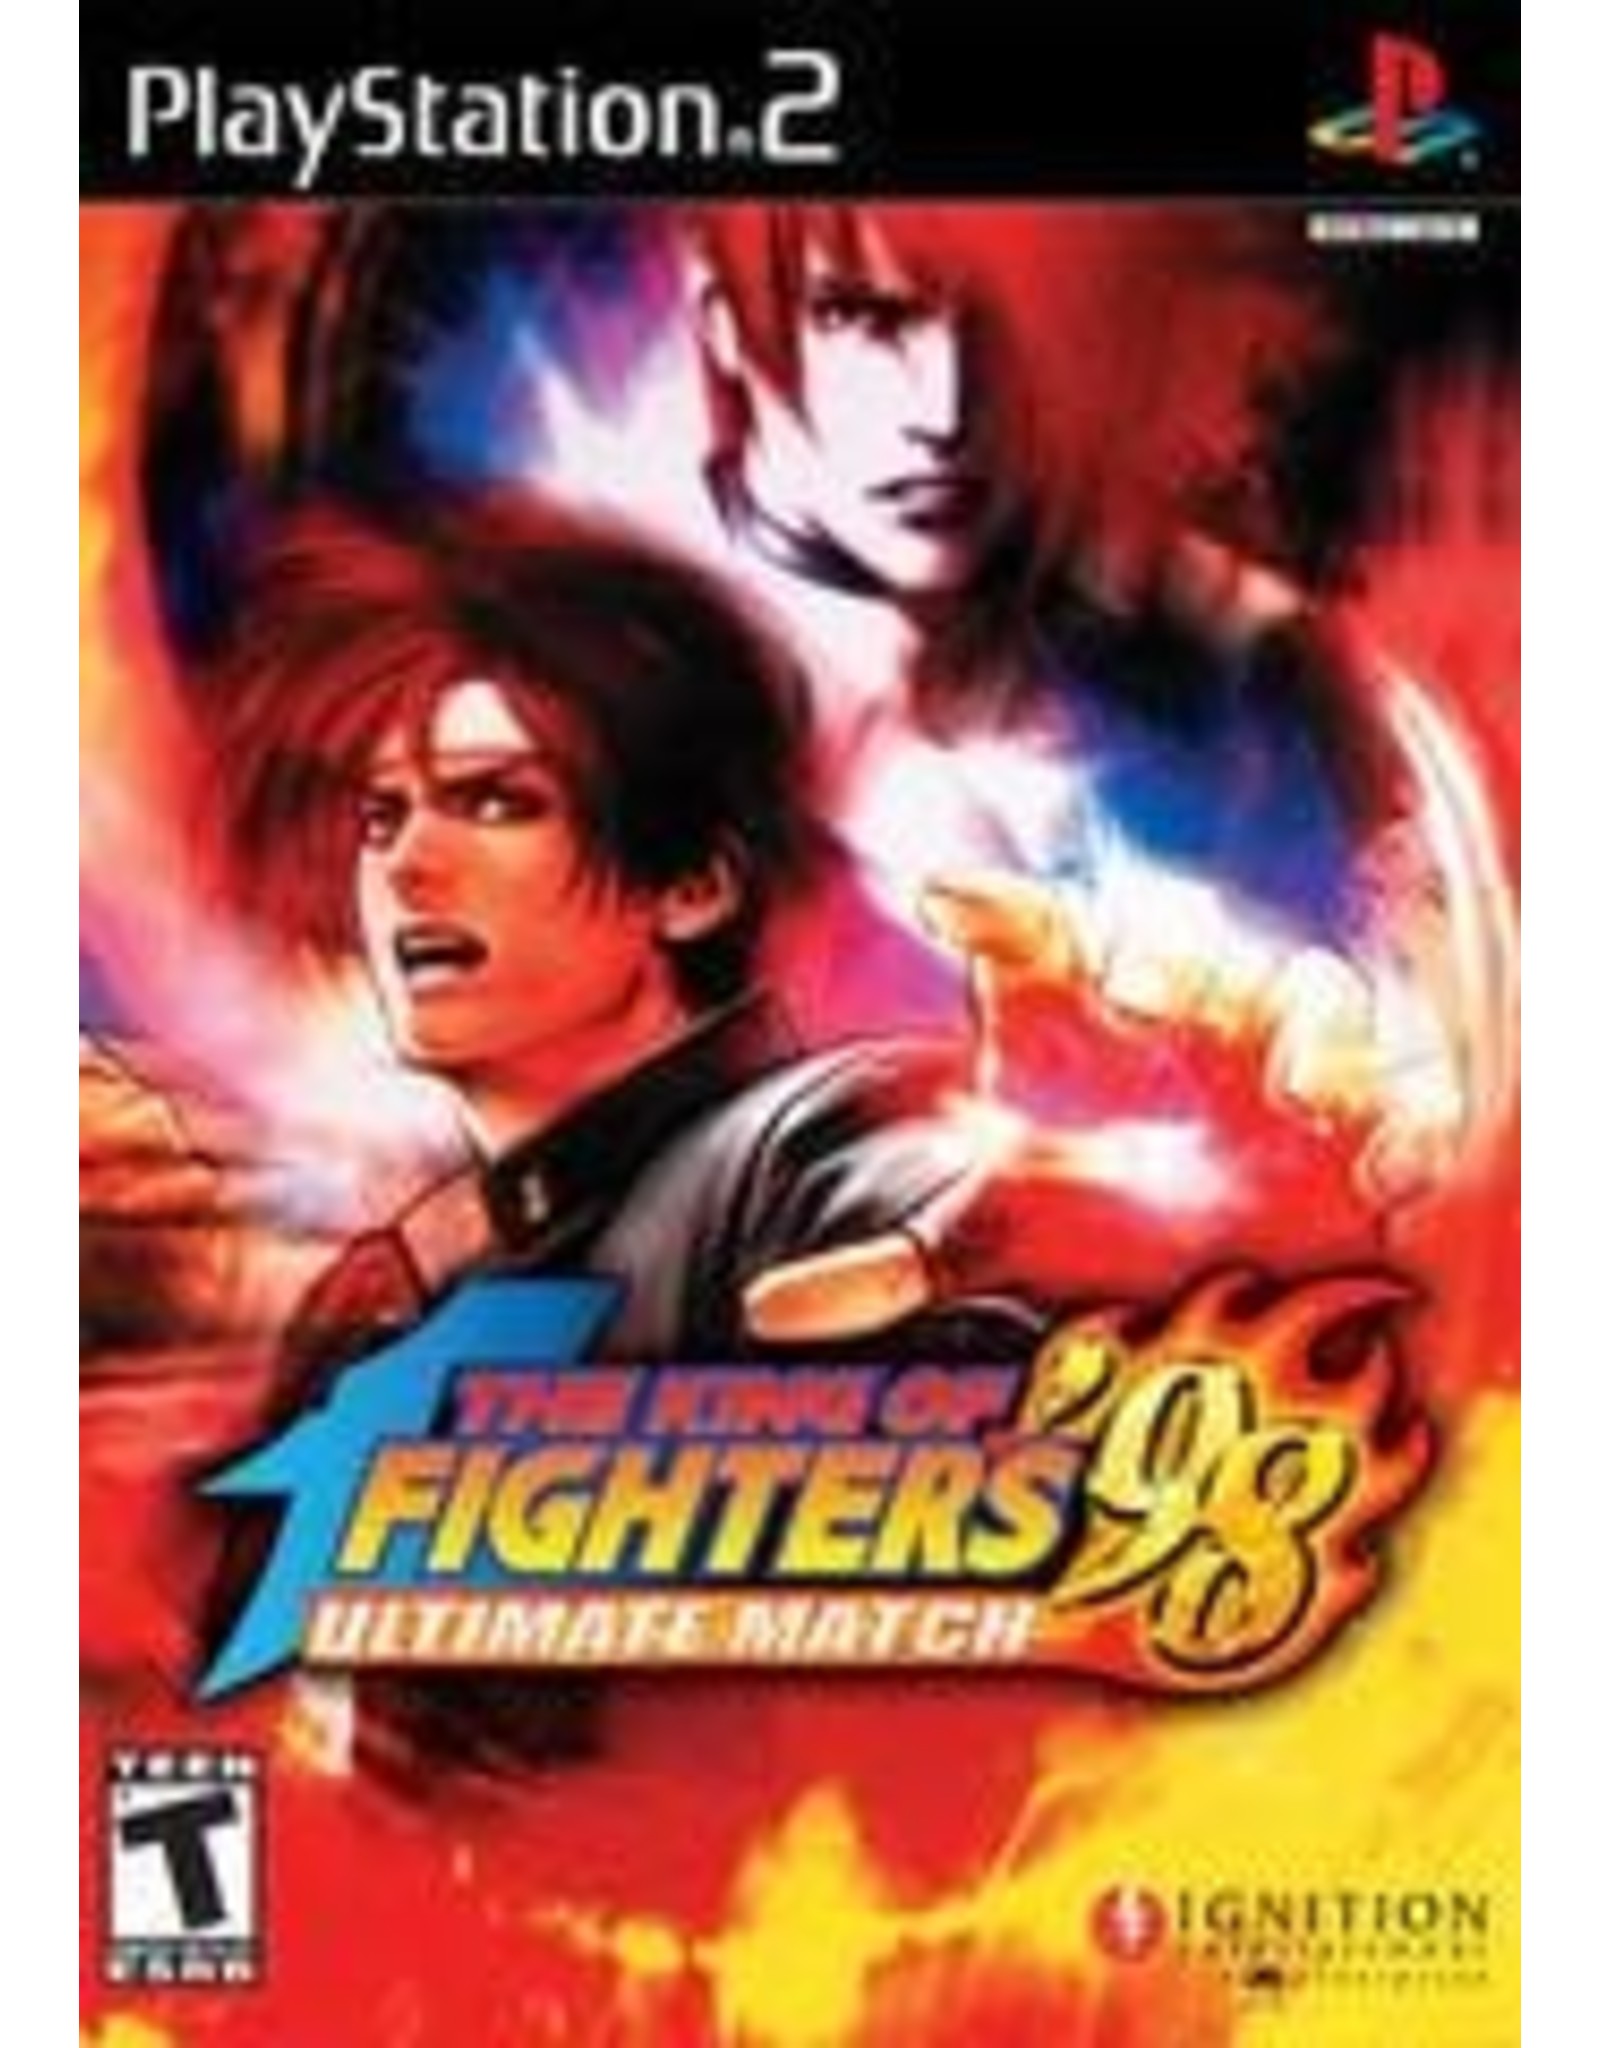 Playstation 2 King of Fighters 98 Ultimate Match (CiB, With Poster, Missing Bonus Disc)